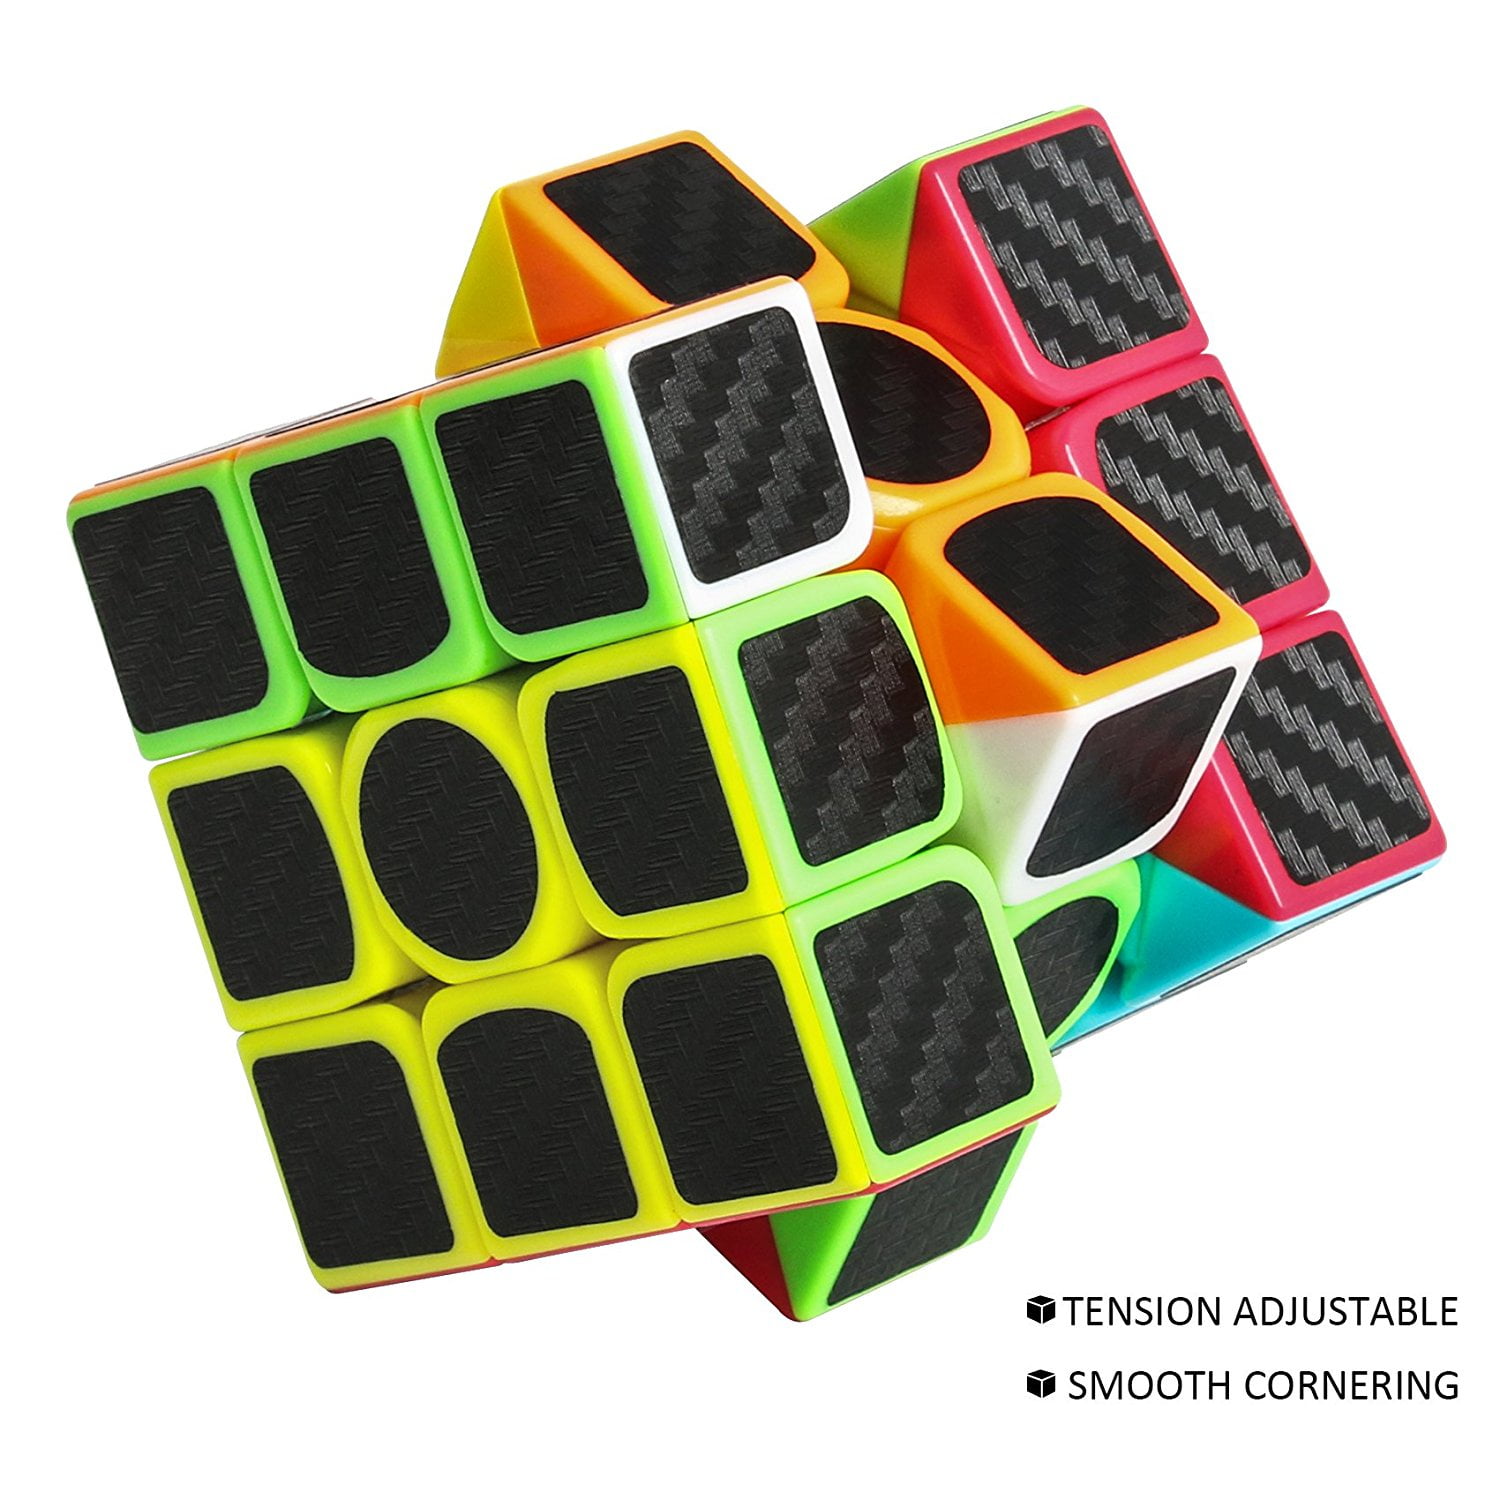 Aiduy 3x3x3 Speed Cube Carbon Fiber Sticker for Smooth Magic Cube Puzzles